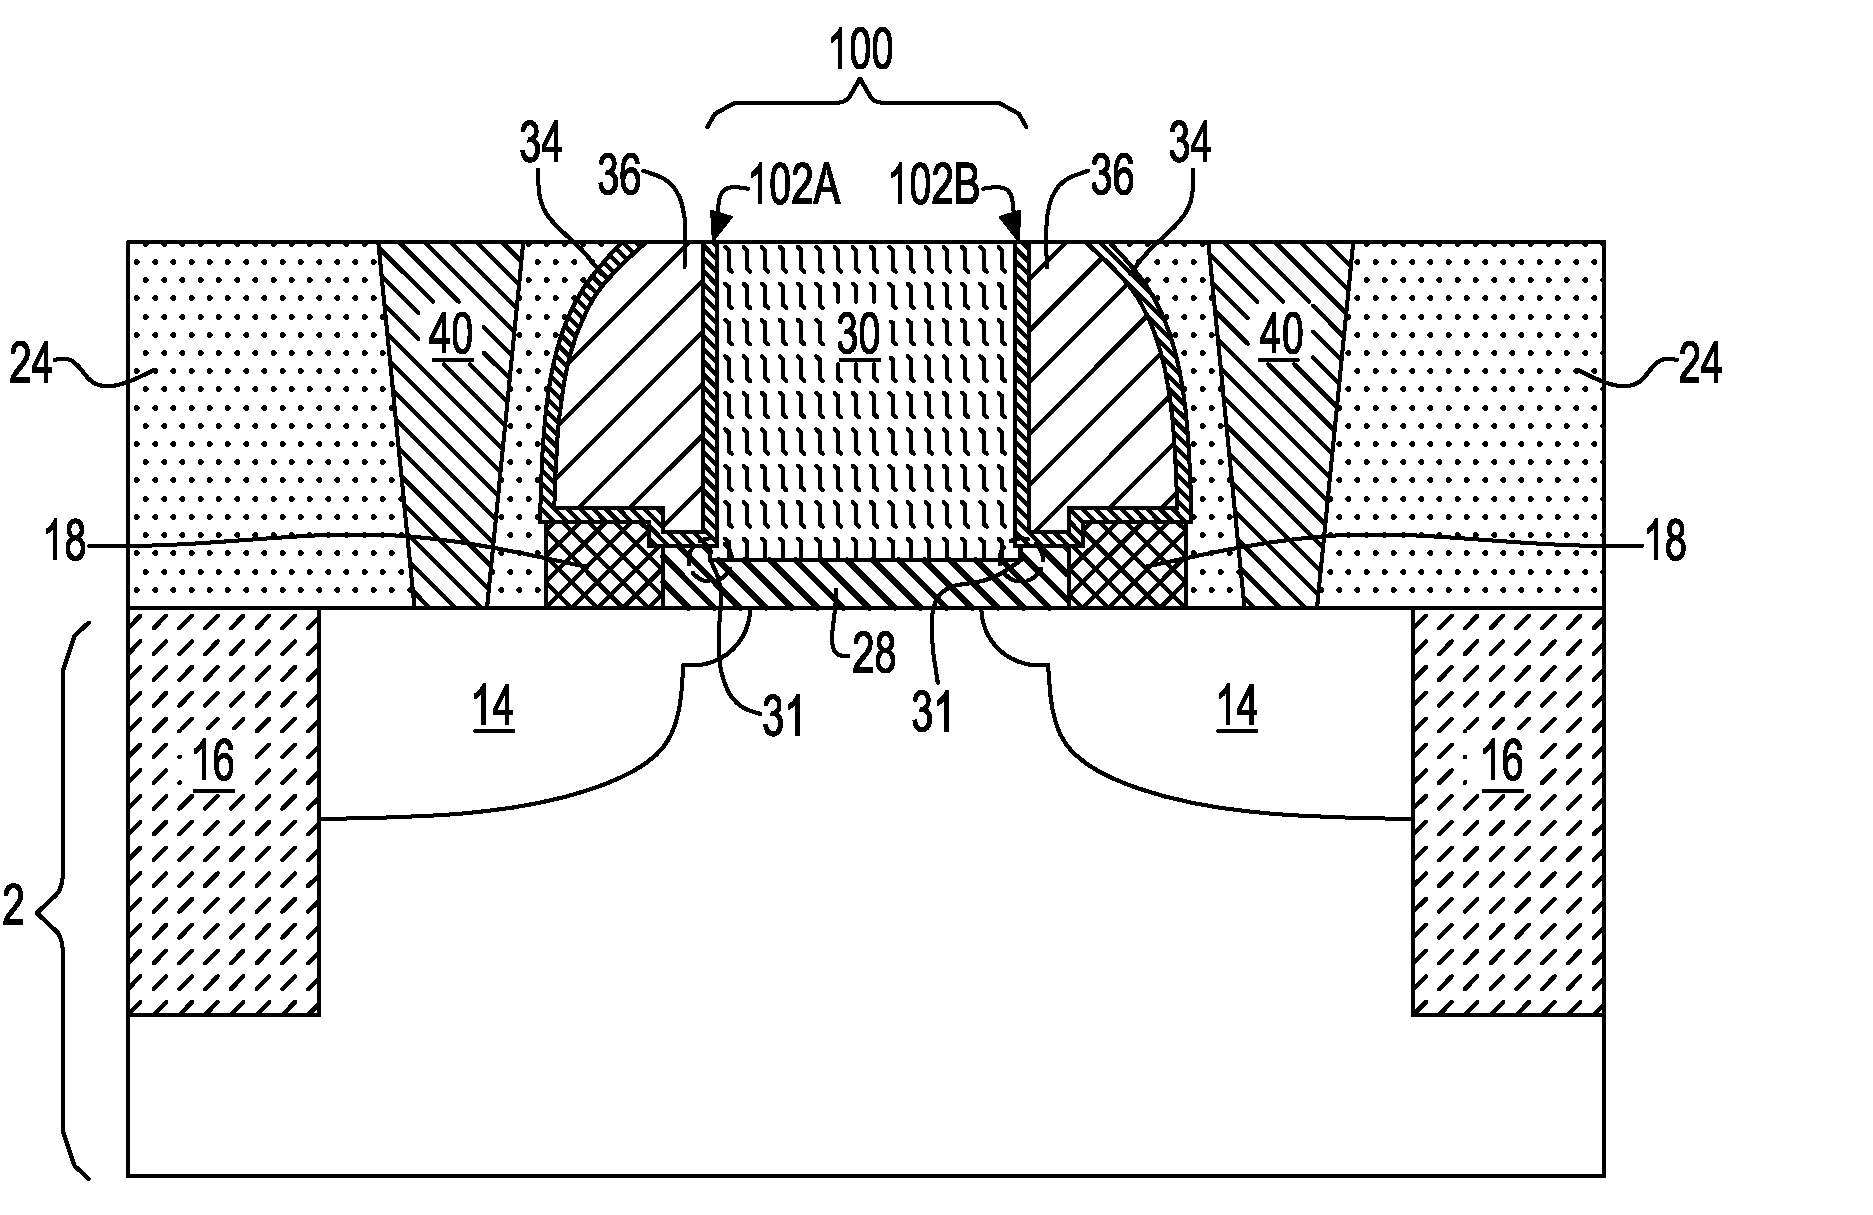 HIGH-k/METAL GATE MOSFET WITH REDUCED PARASITIC CAPACITANCE